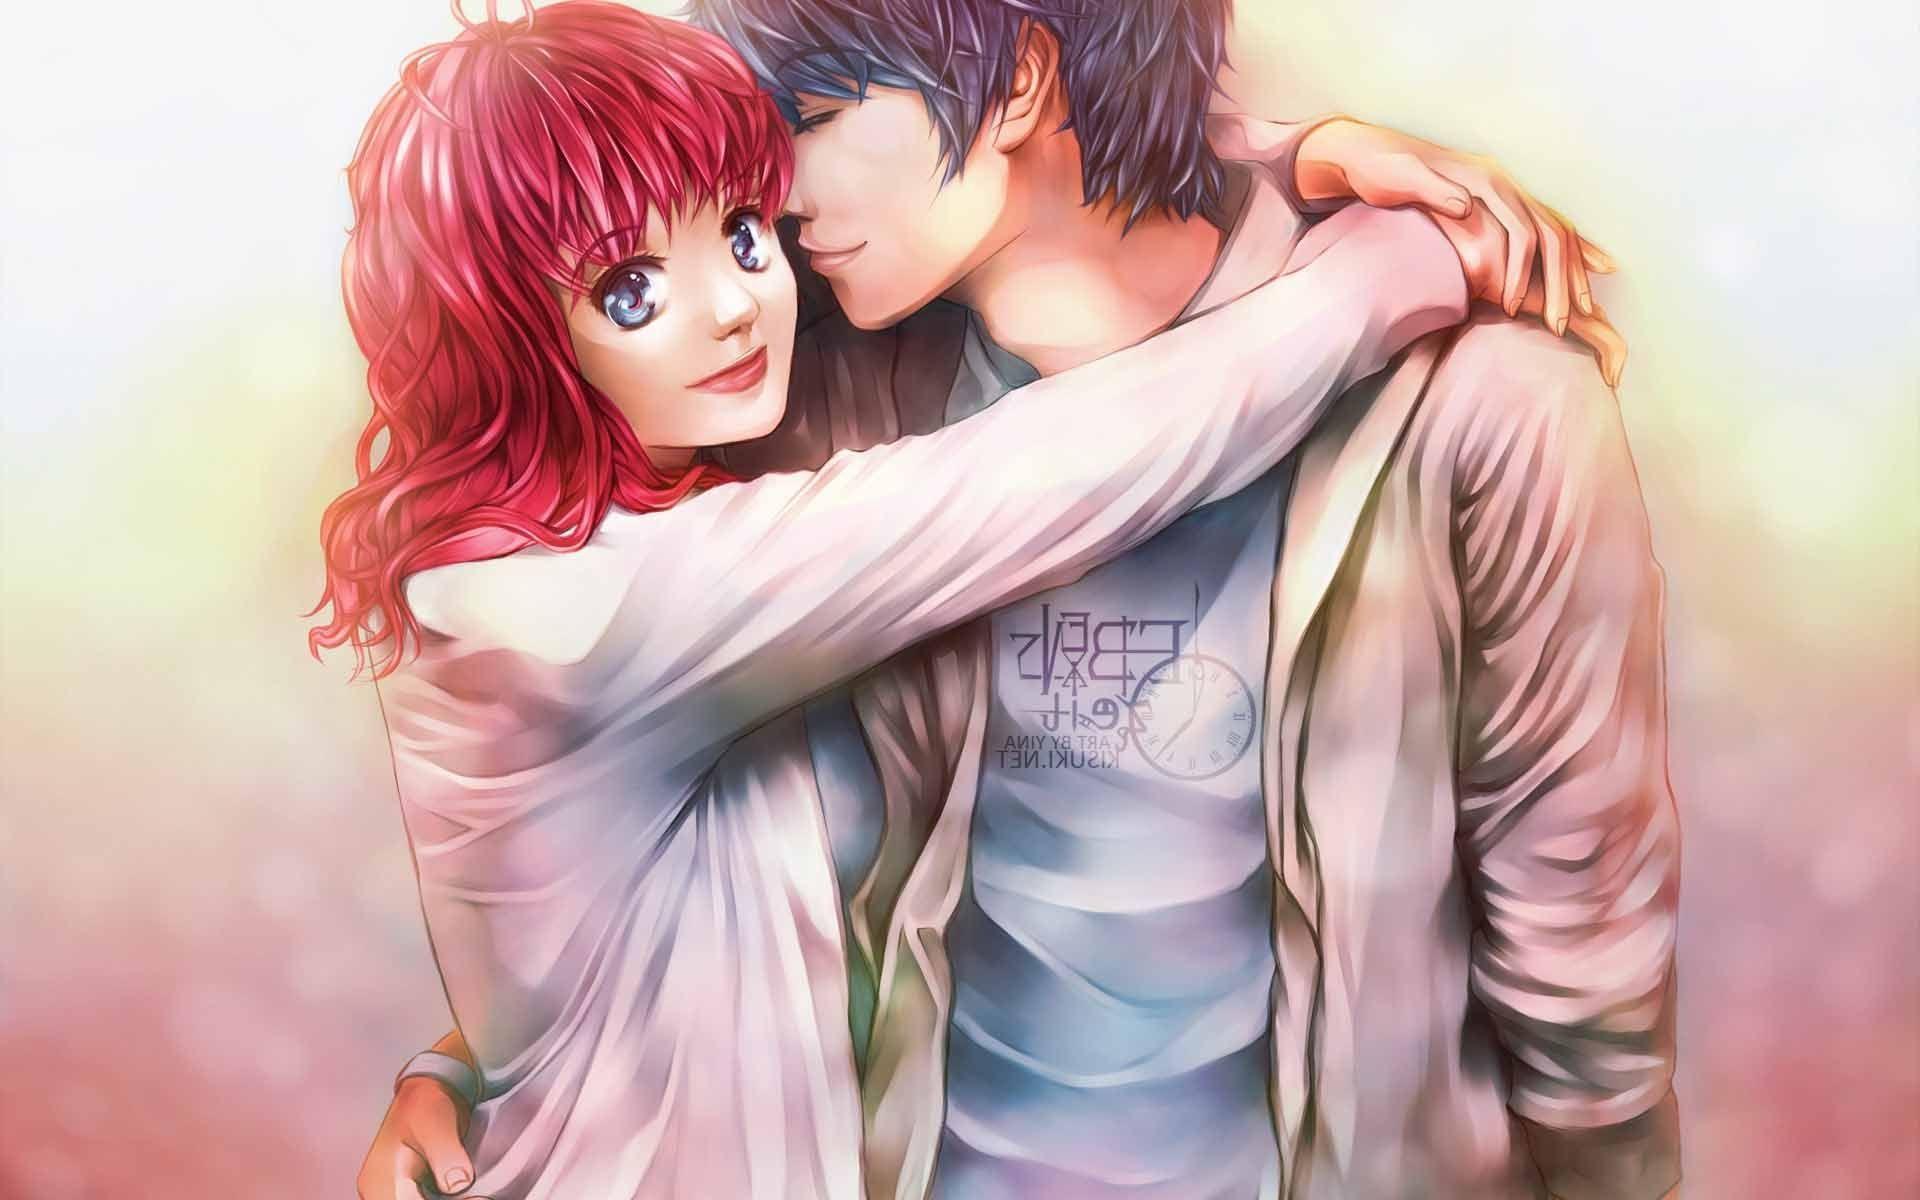 Cute Anime Couple Wallpapers For Mobile - Wallpaper Cave